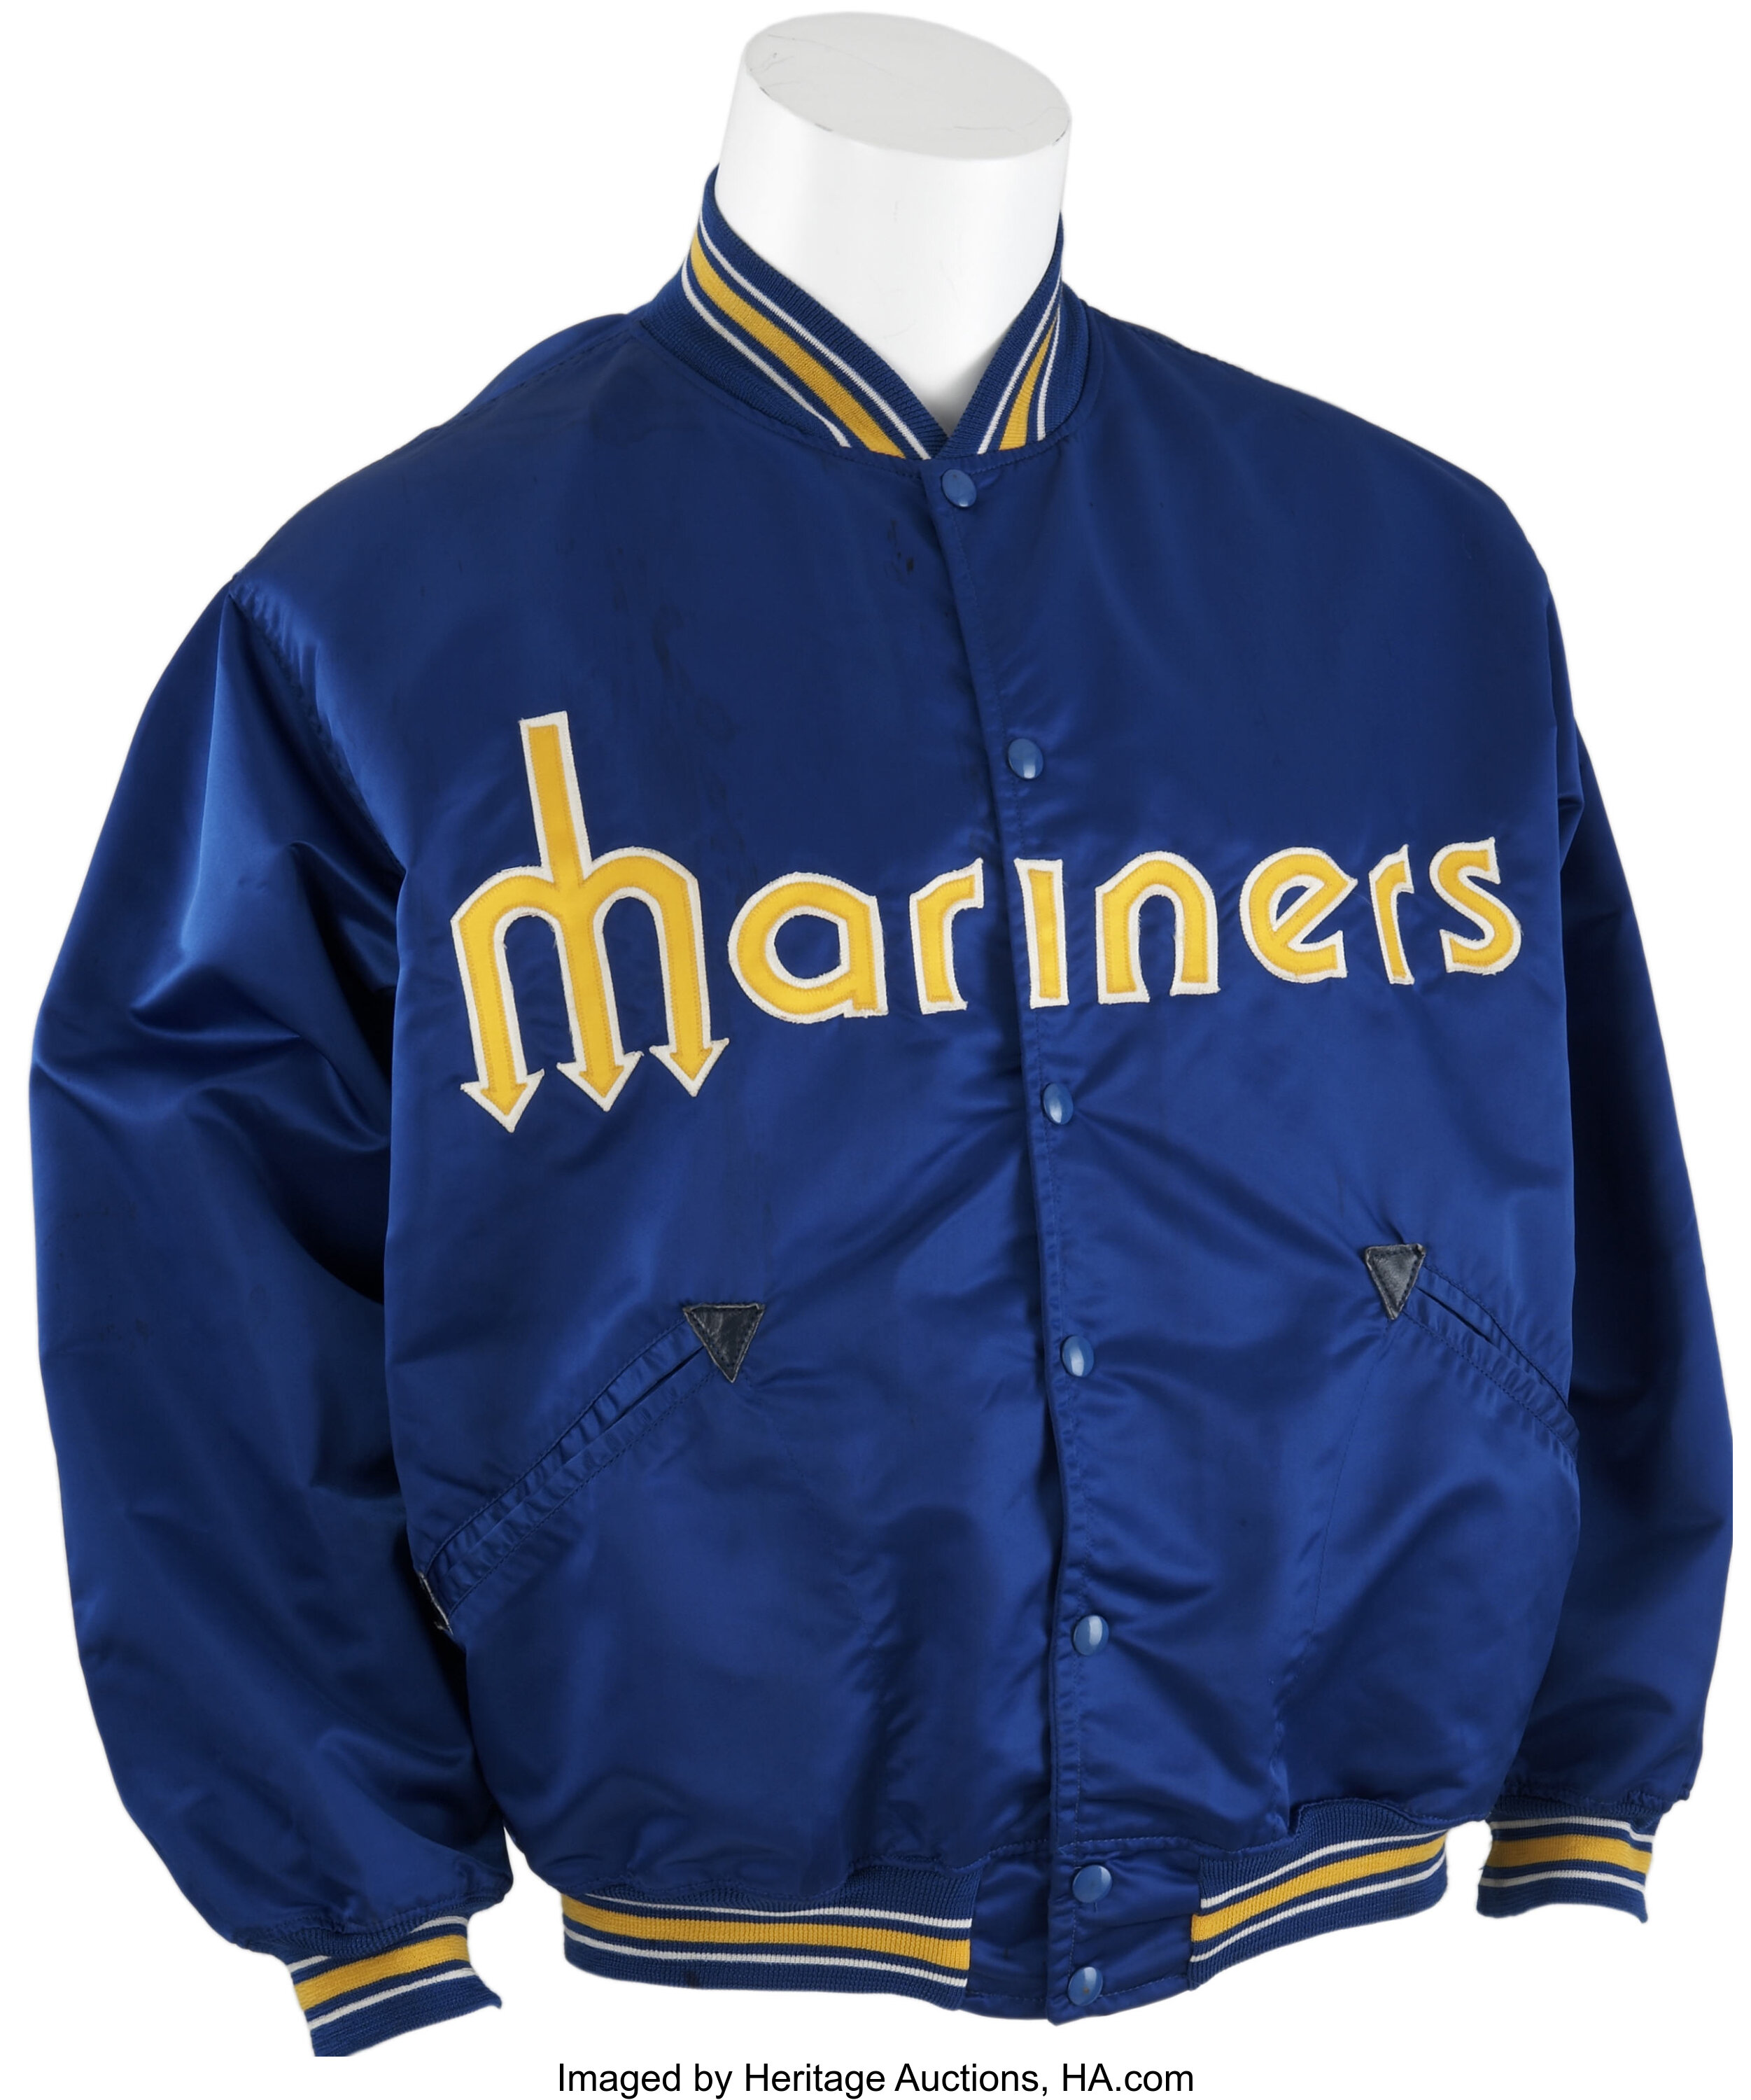 Lot Detail - 1983 Gaylord Perry Seattle Mariners Game-Used